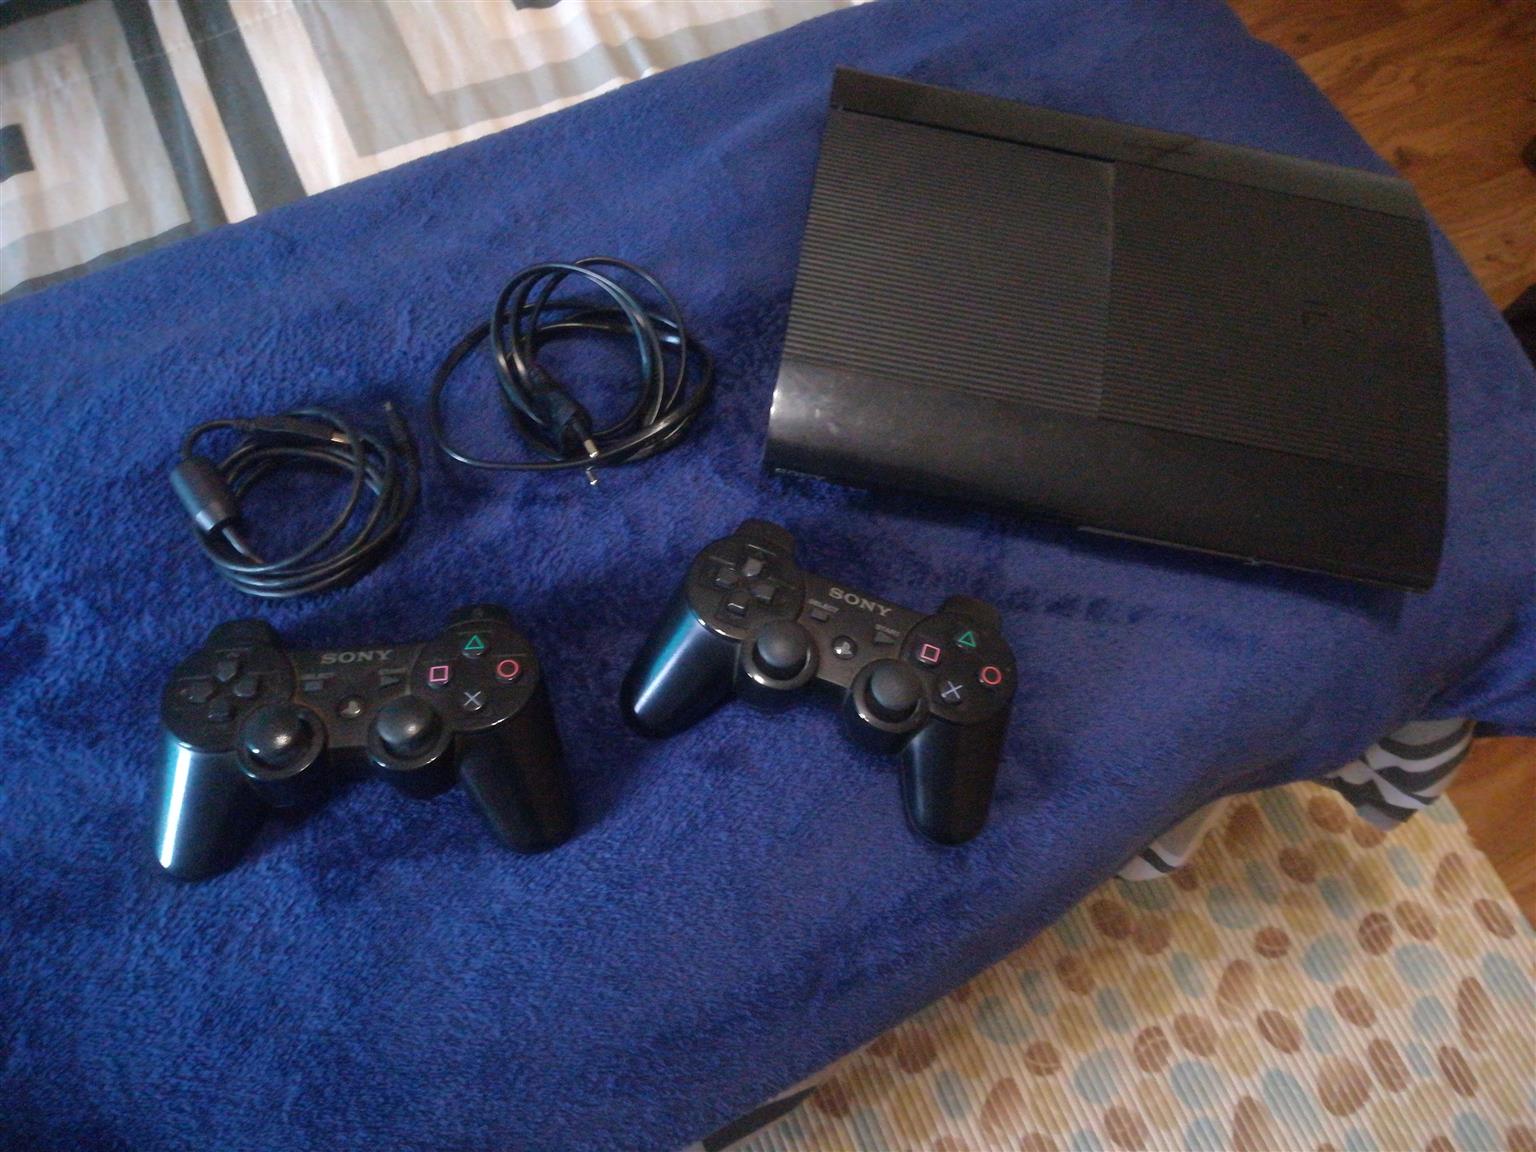 Ps3 to swop for a Ps4 